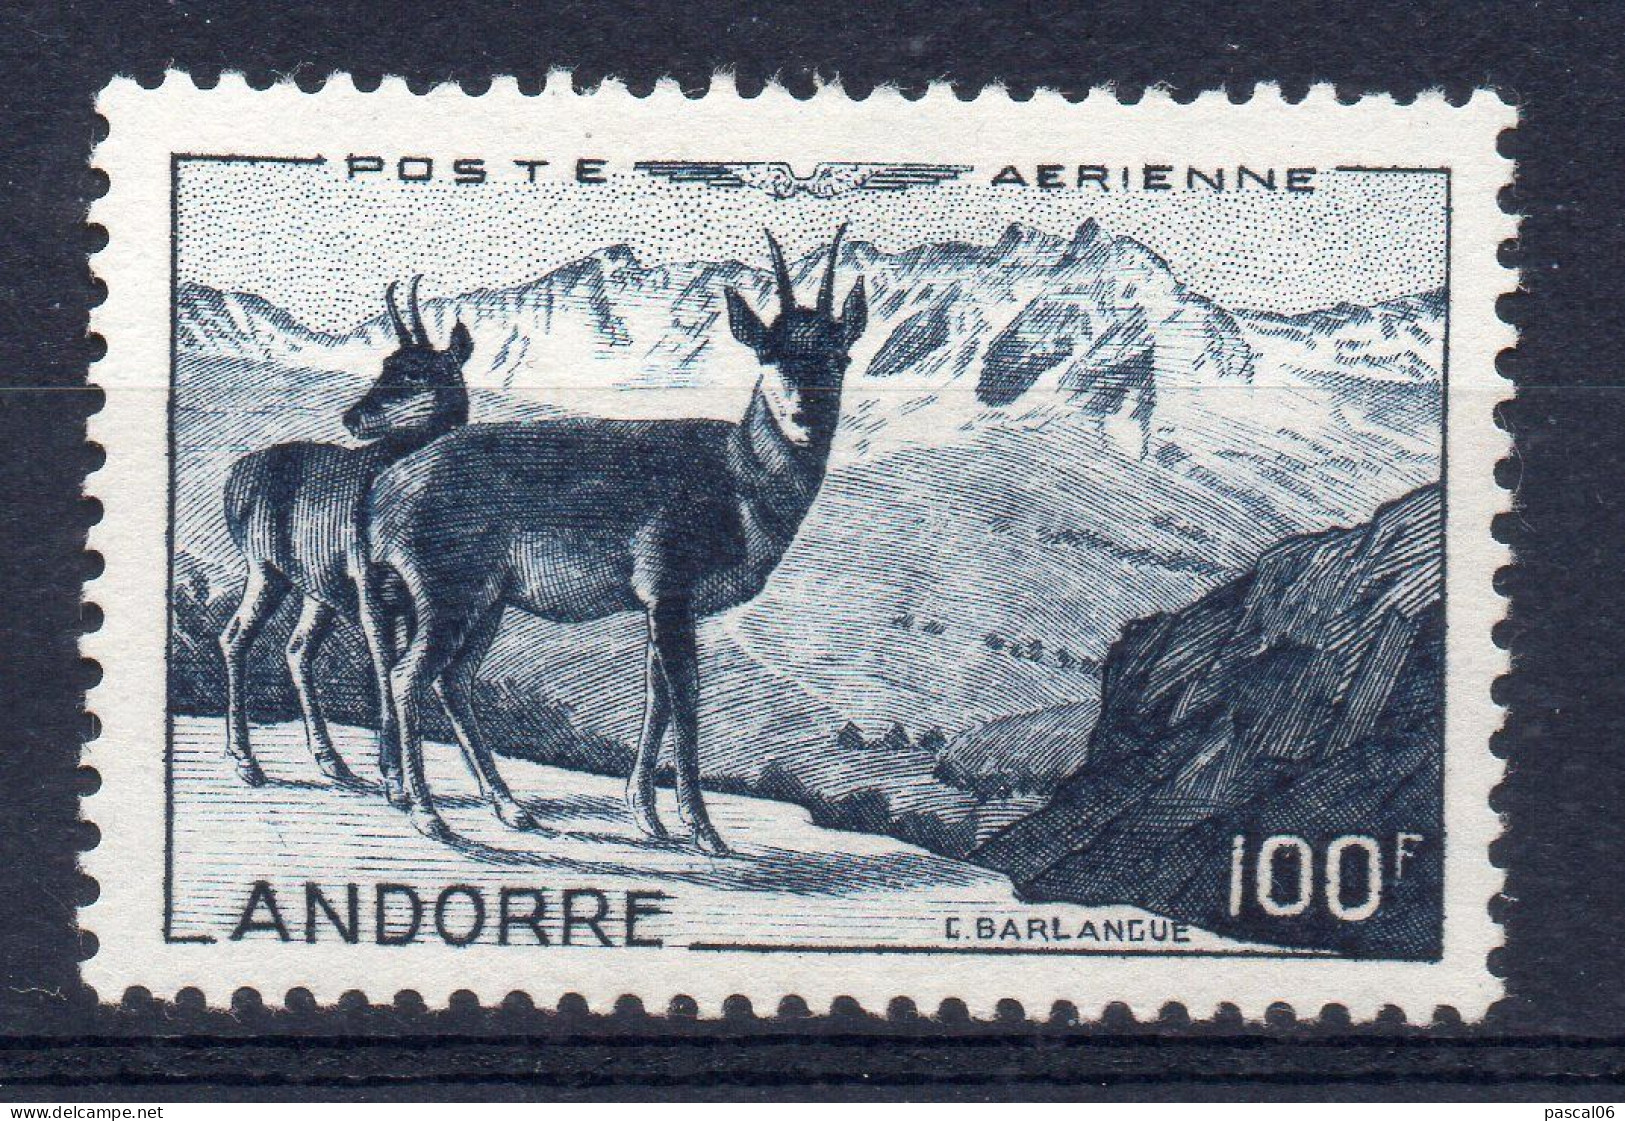 ANDORRE POSTE AÉRIENNE / N° 1 100f ISARDS ET PAYSAGE / NEUF** / COTE 110 € - Airmail